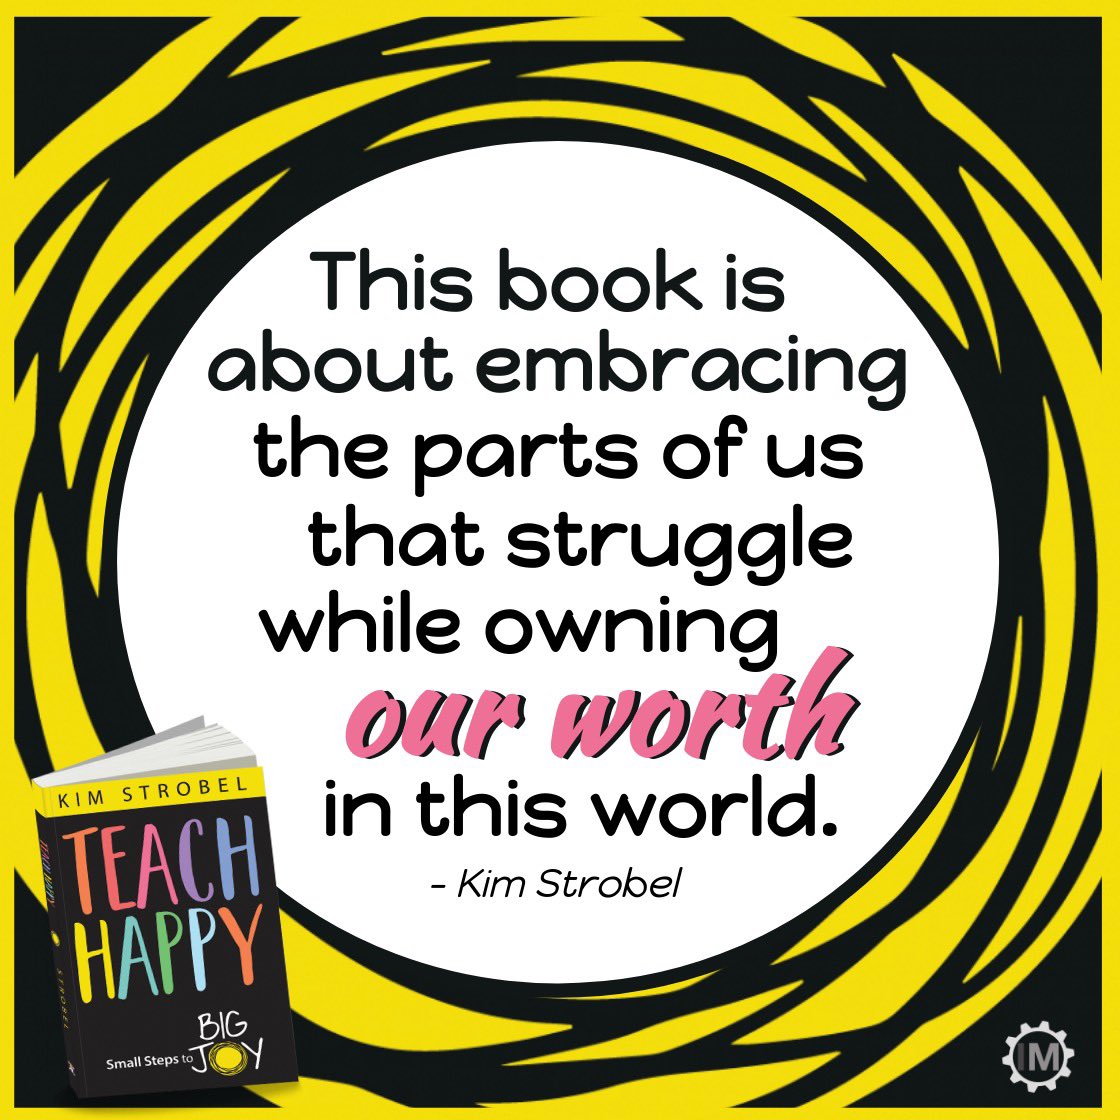 Kim Strobel's #TeachHappy book is OUTSTANDING!
Have you checked it out yet?
We are so proud of this project!
Learn more here: a.co/d/9x8iJpe
#dbcincbooks @strobeled @burgessdave @TaraMartinEDU